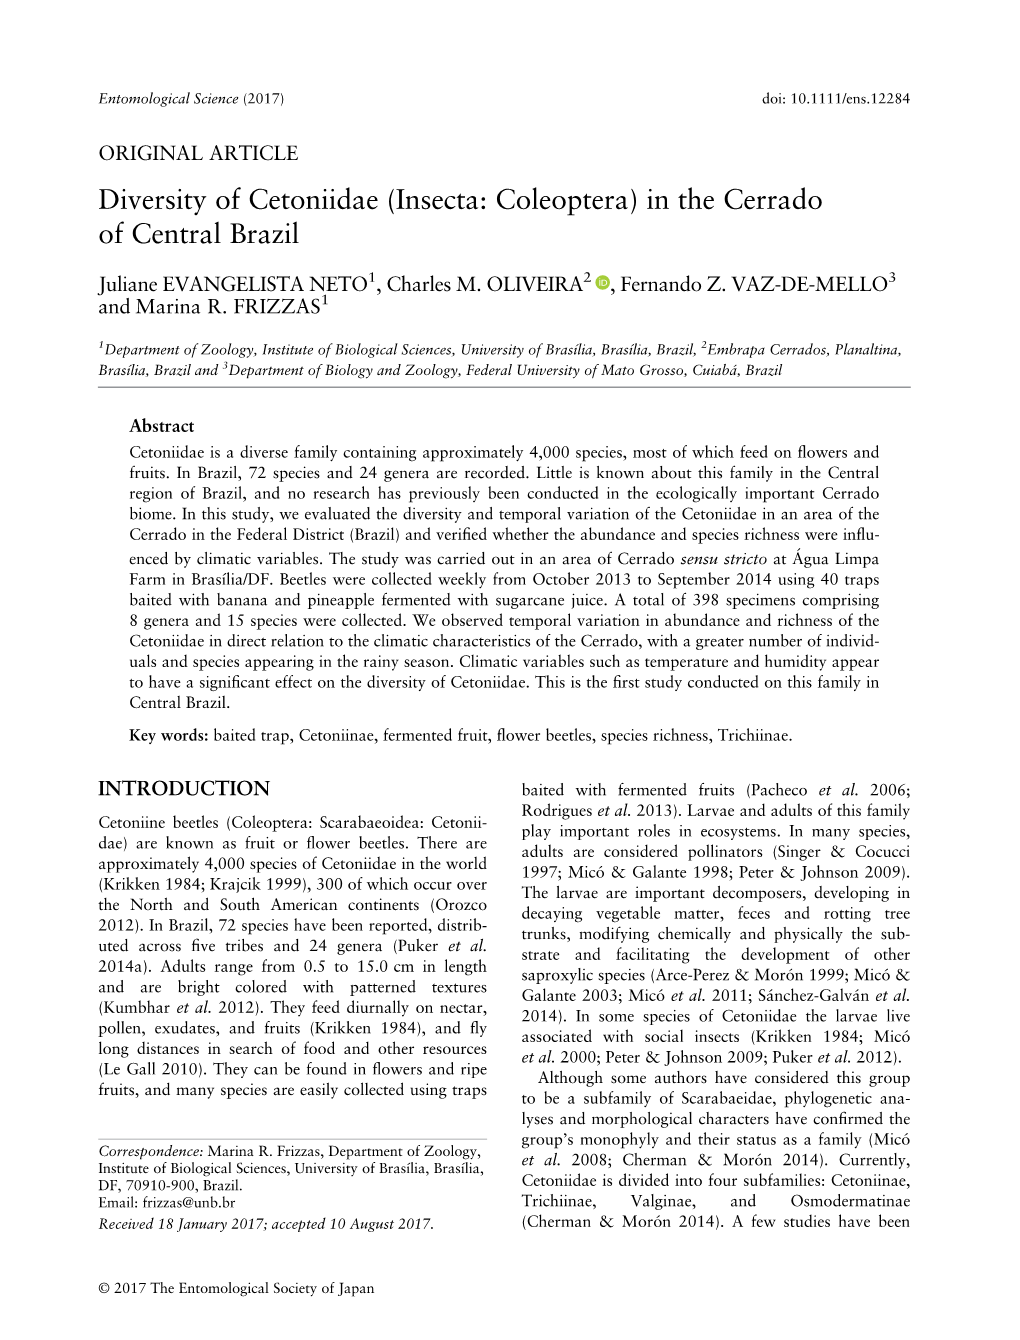 Diversity of Cetoniidae (Insecta: Coleoptera) in the Cerrado of Central Brazil